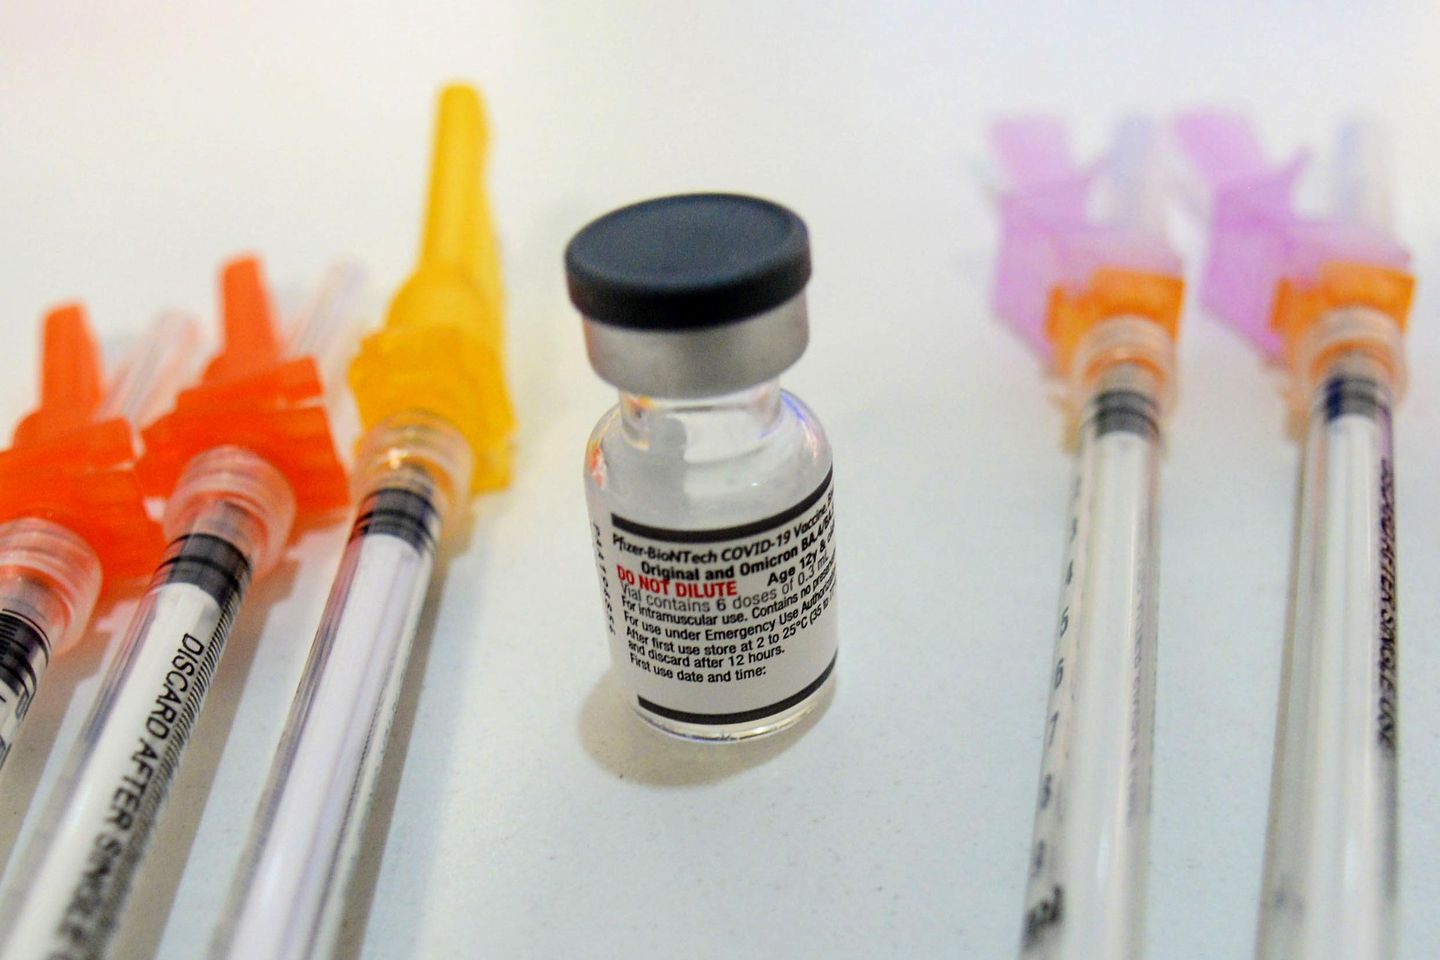 CDC weighs vaccine schedule for kids, but advisers cannot require COVID vaccines for school